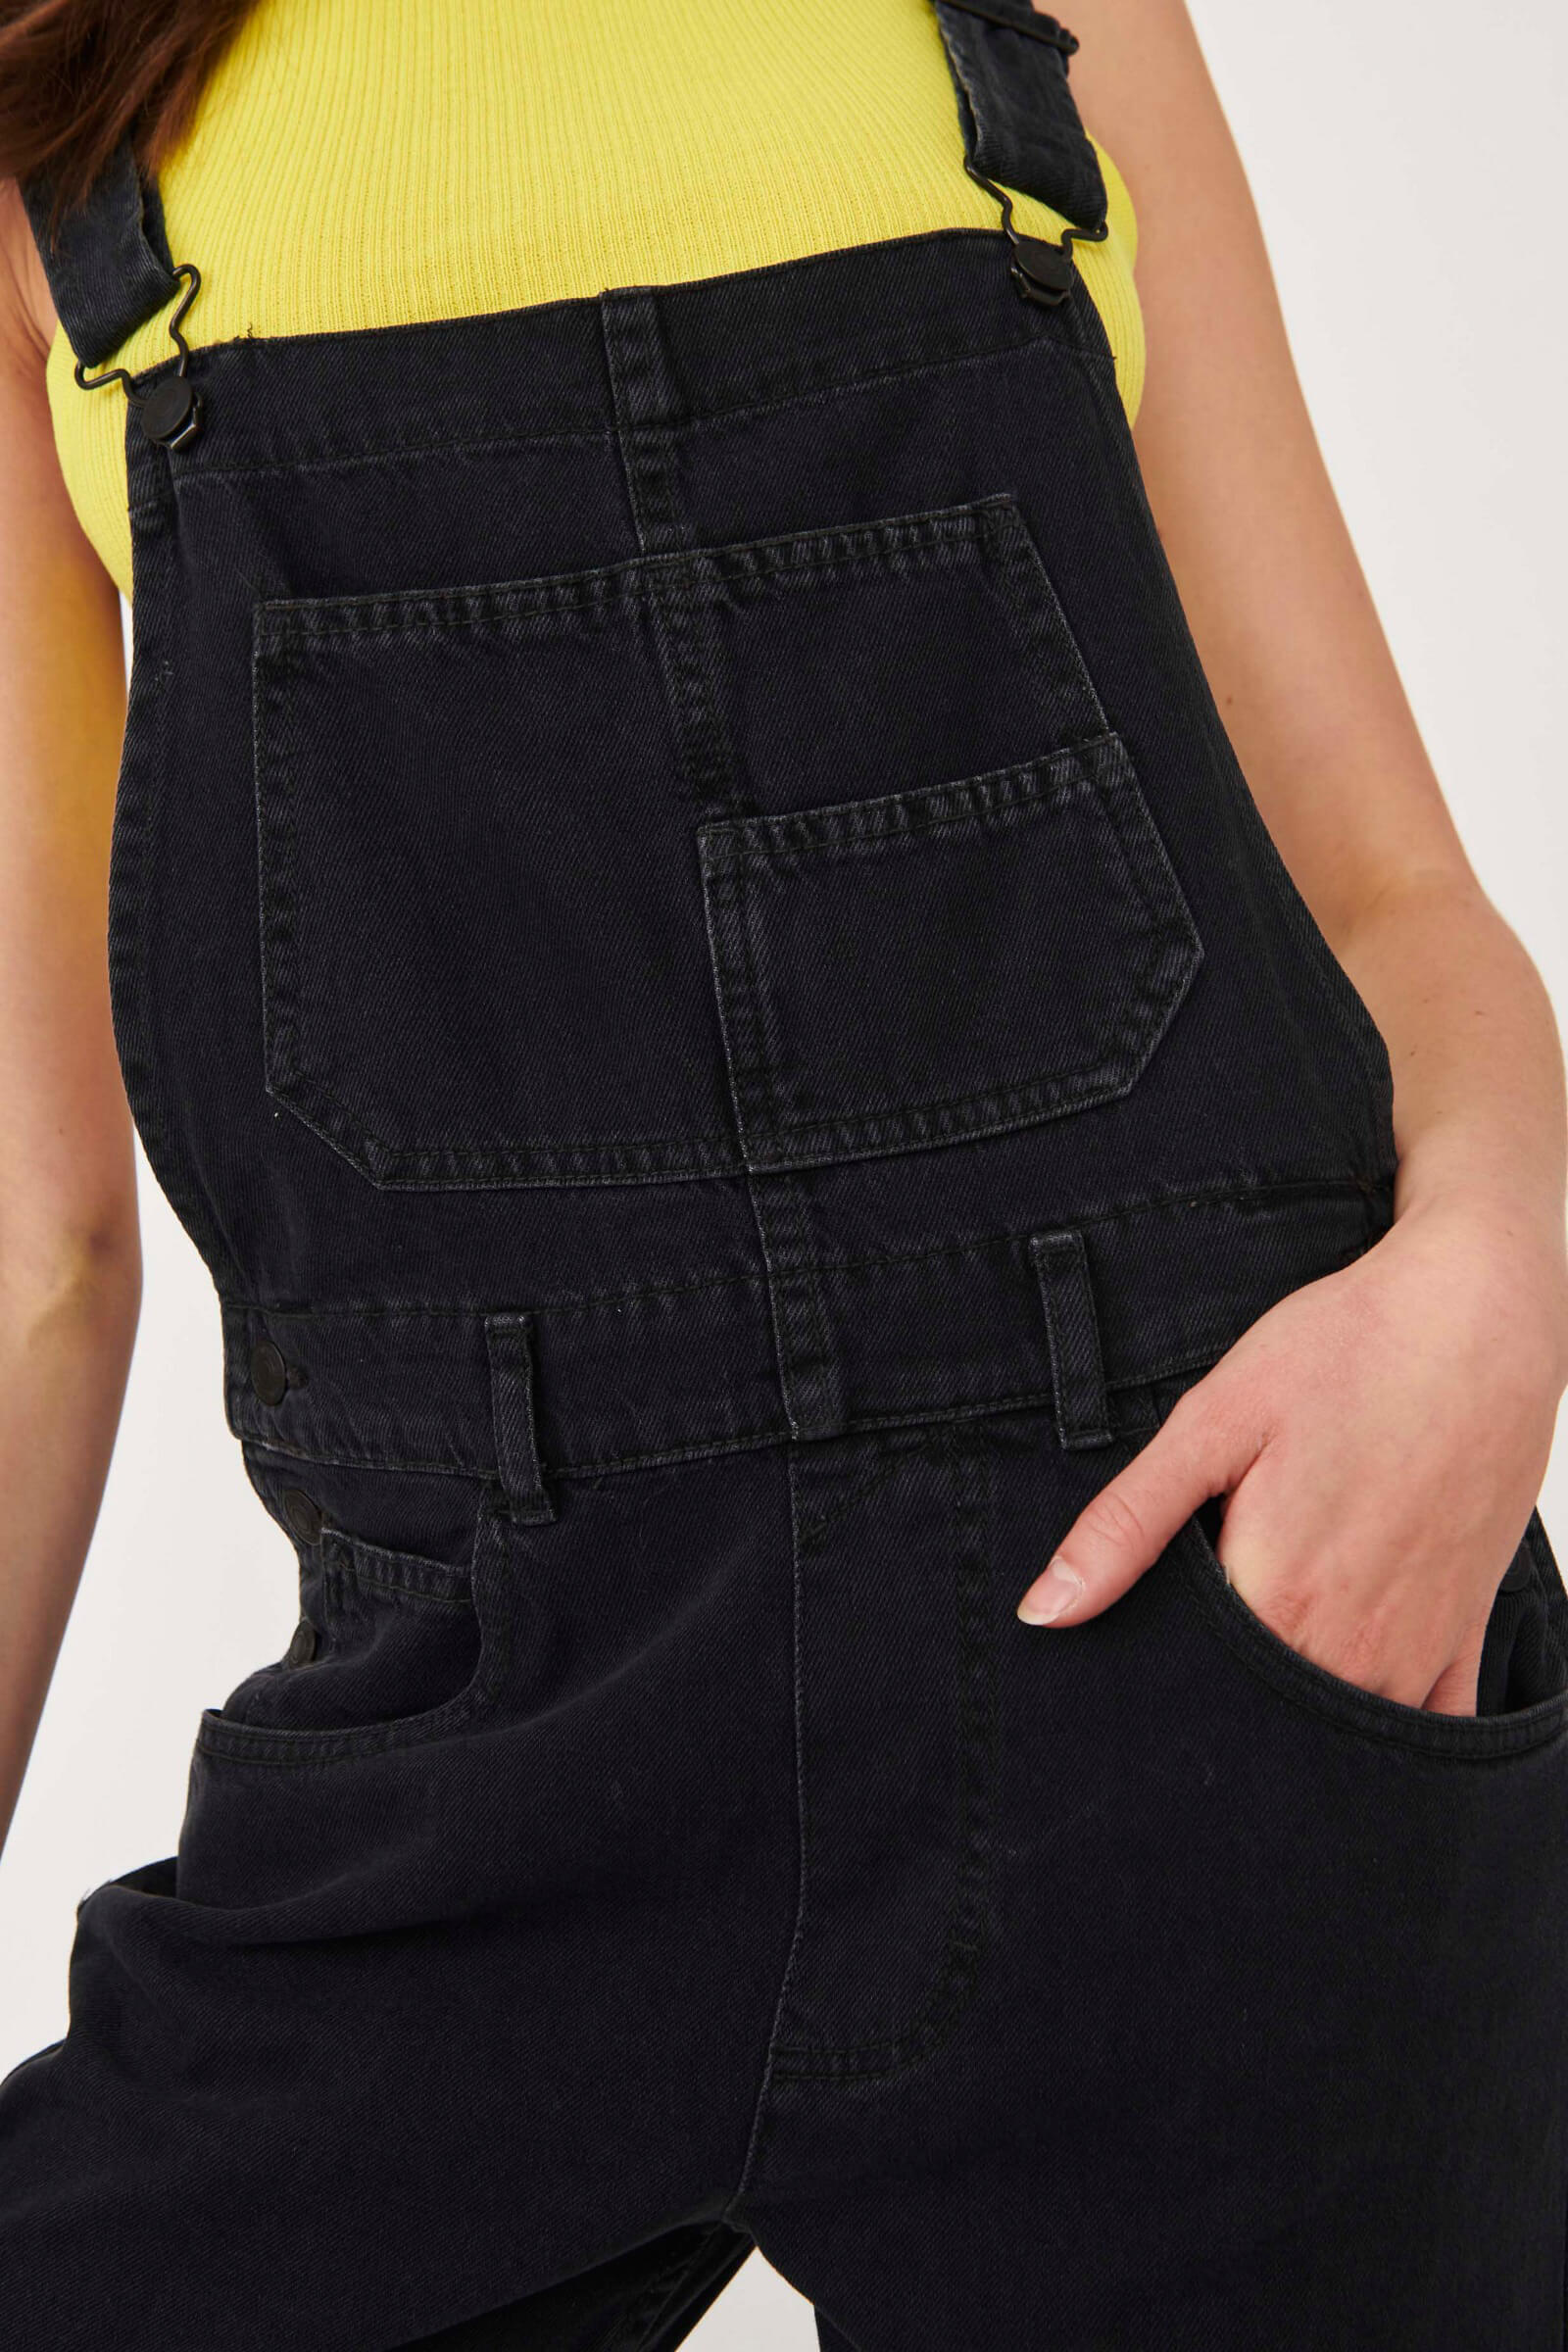 Free People ziggy denim overall in mineral black